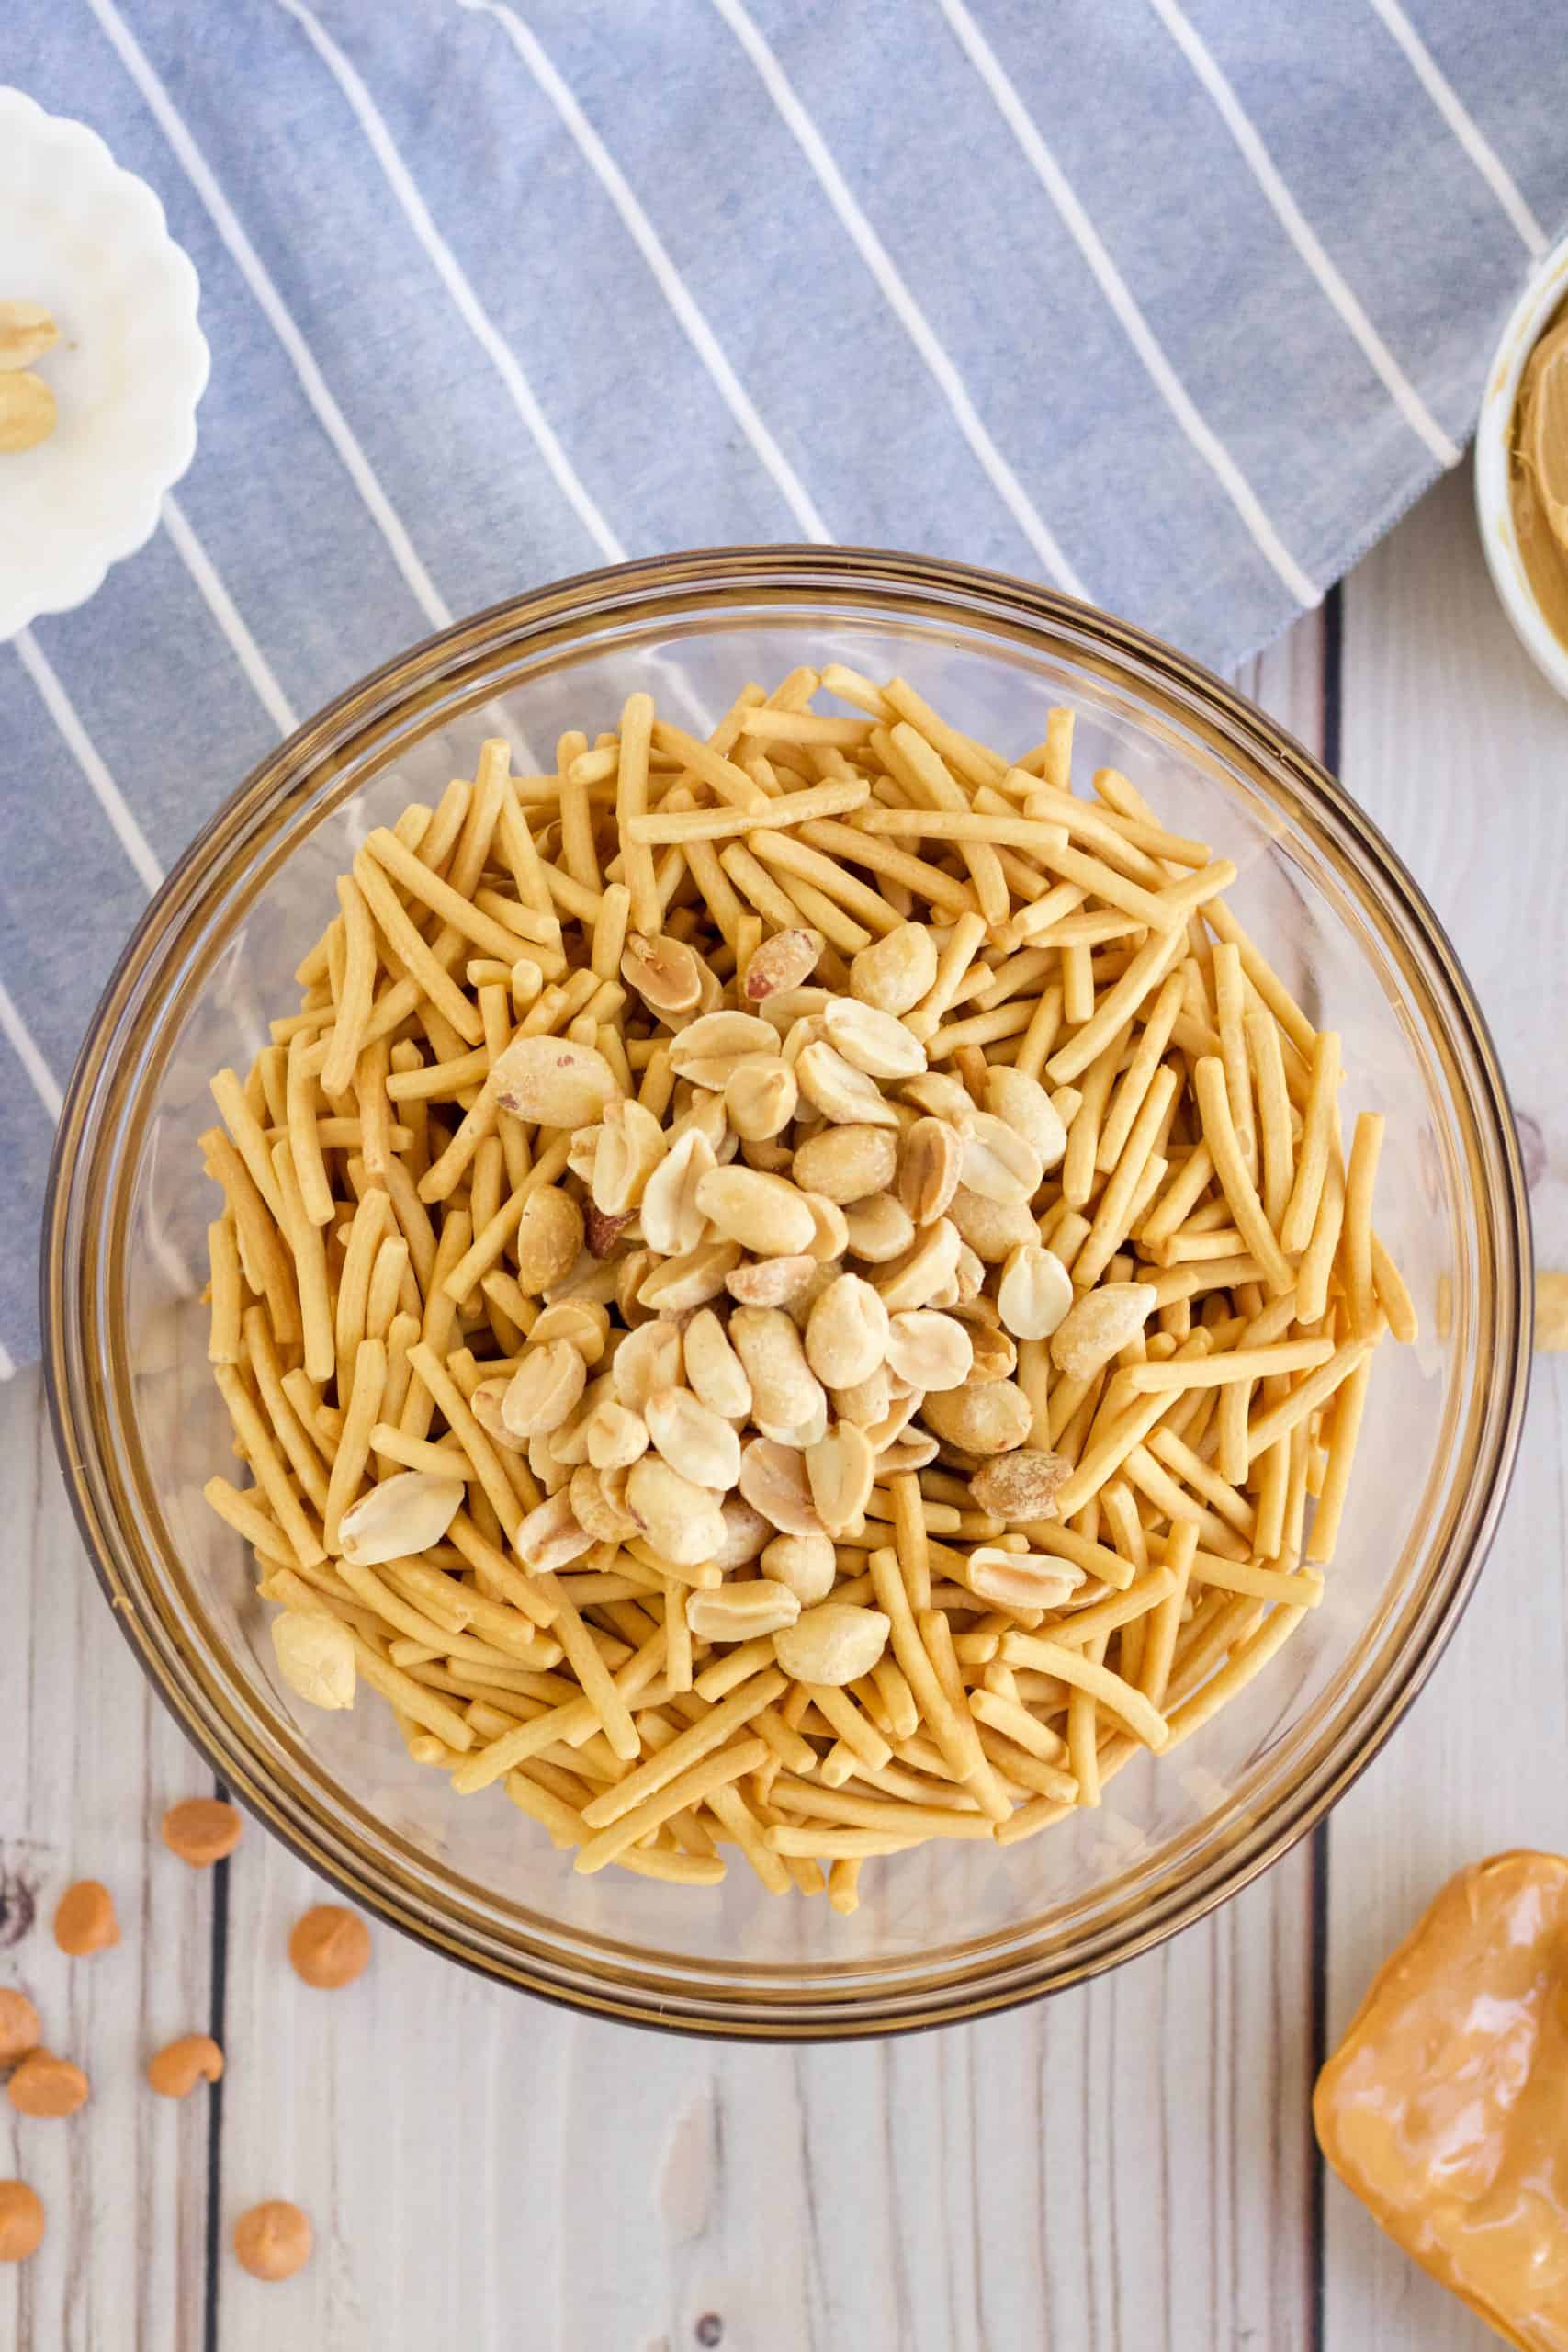 chow mein noodles and roasted peanuts added to bowl with melted butterscotch and peanut butter in a clear glass bowl.